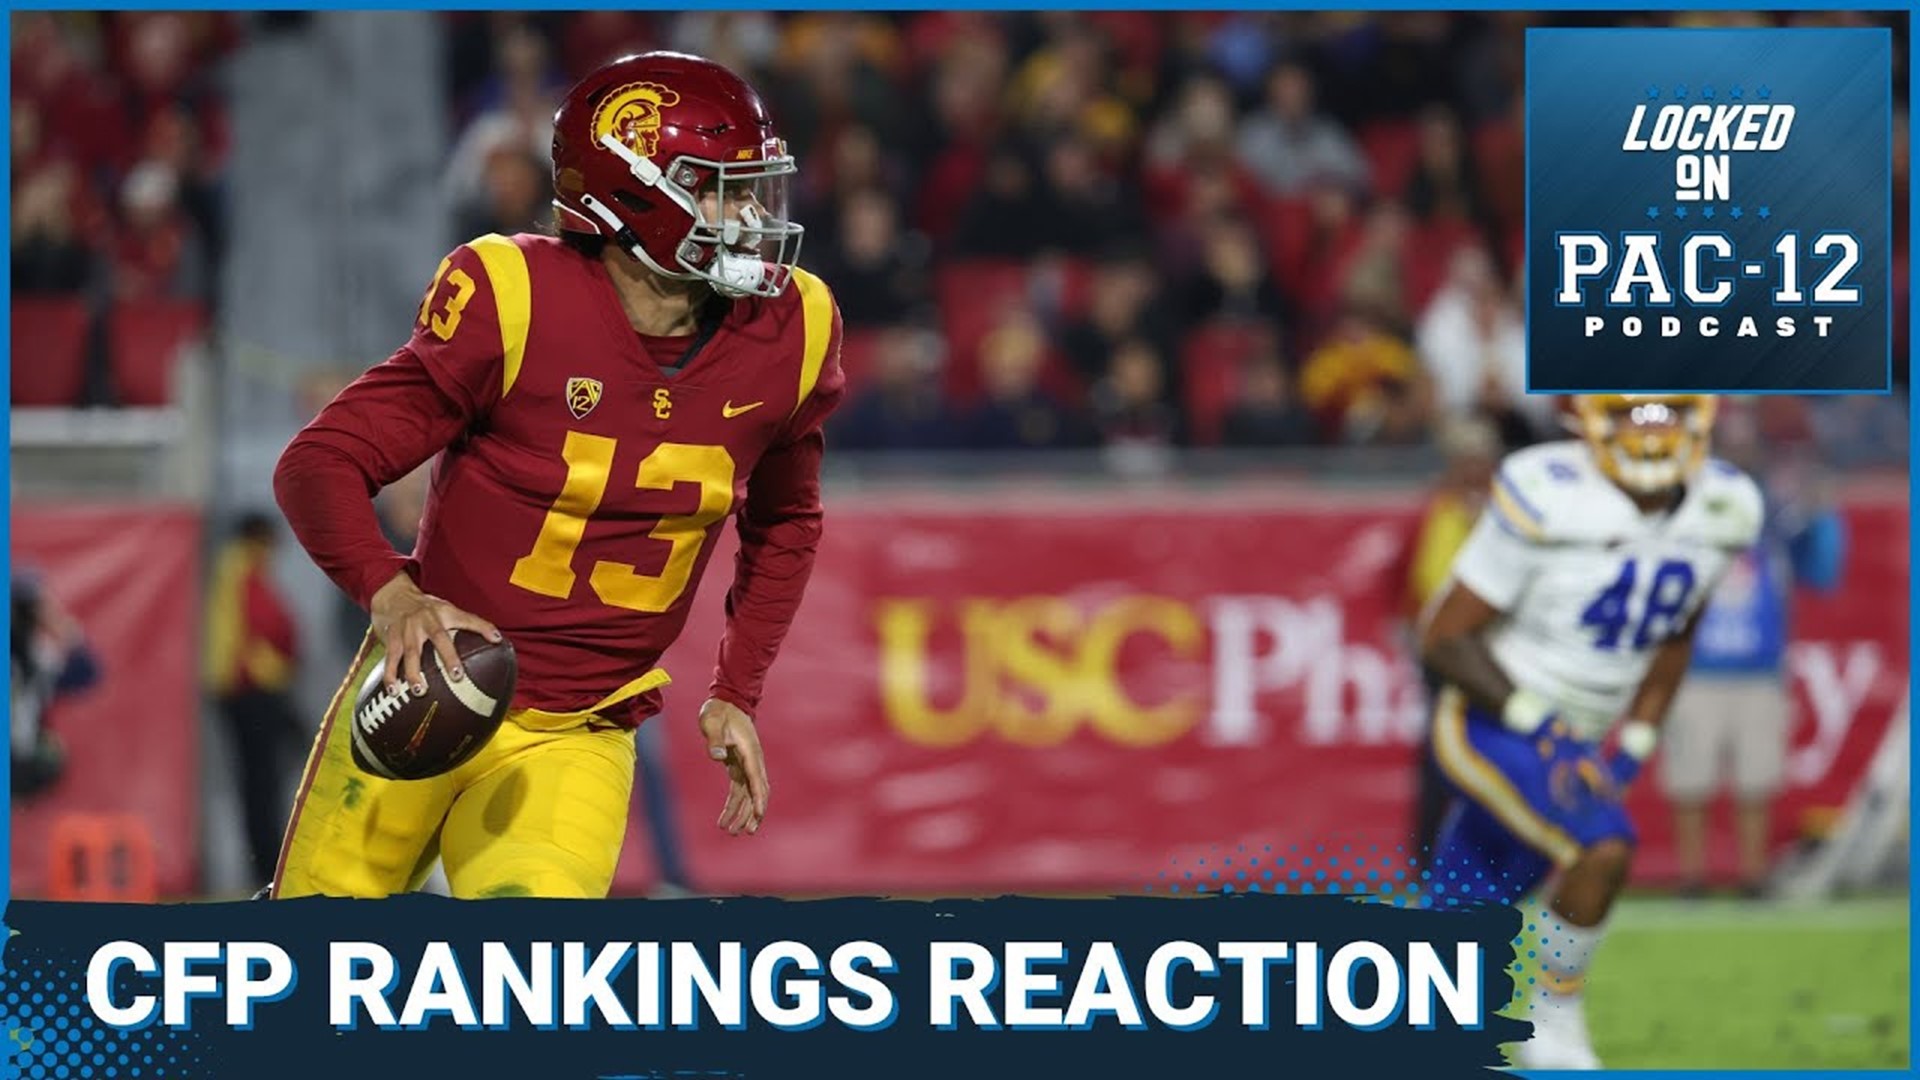 The Pac-12 has three teams in the latest CFP rankings that fall inside the top 12, but the Trojans are getting too much respect based on their resume.